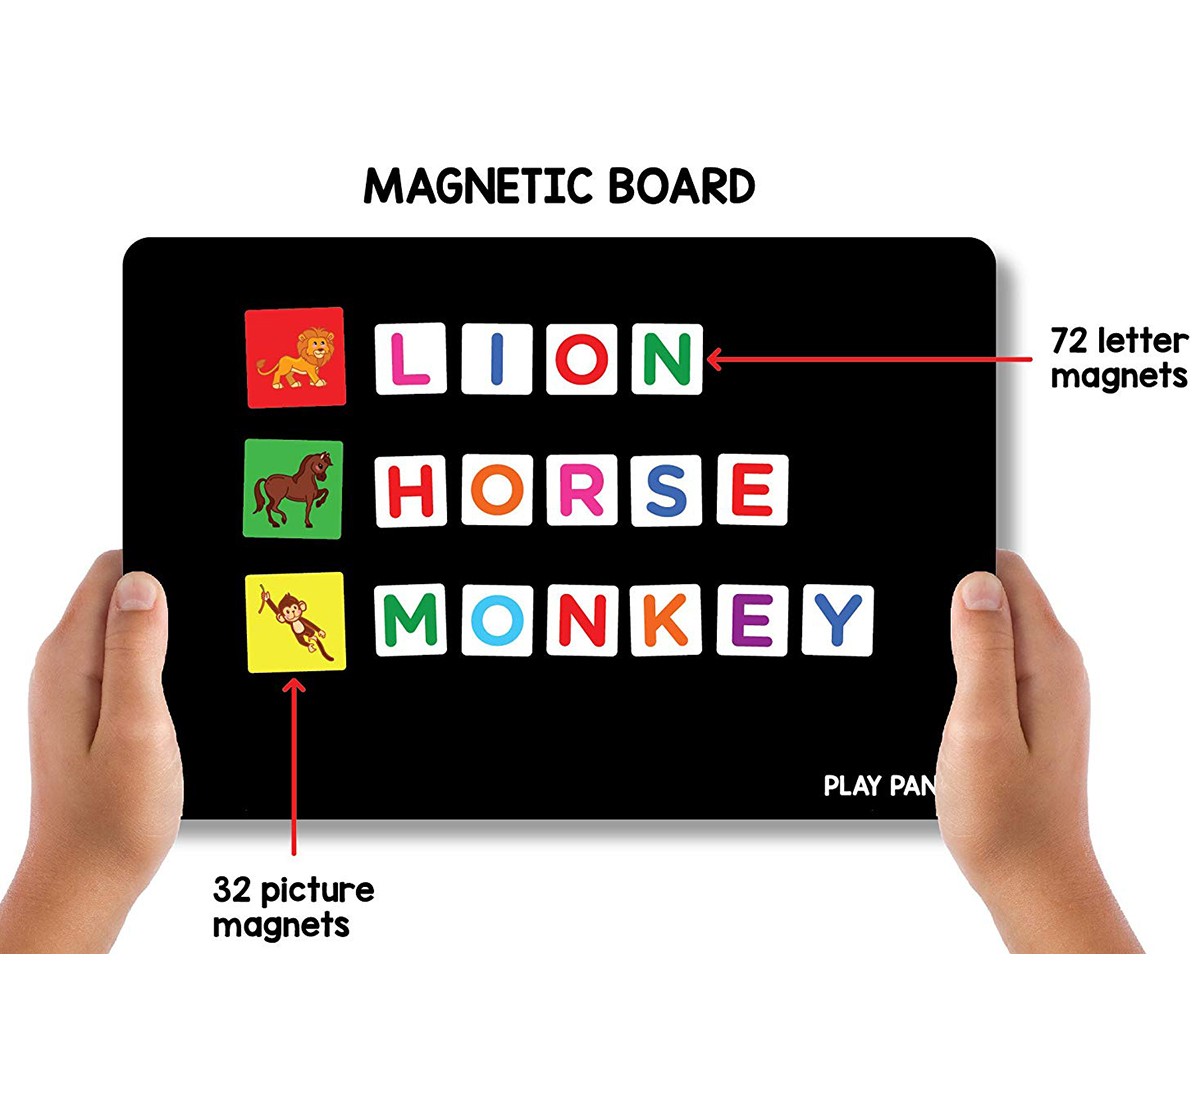 Play Panda Magnetic Learn To Spell Animals With 32 Picture Magnets, 72 Letter Magnets, Magnetic Board And Spelling Guide,  4Y+ (Multicolor)